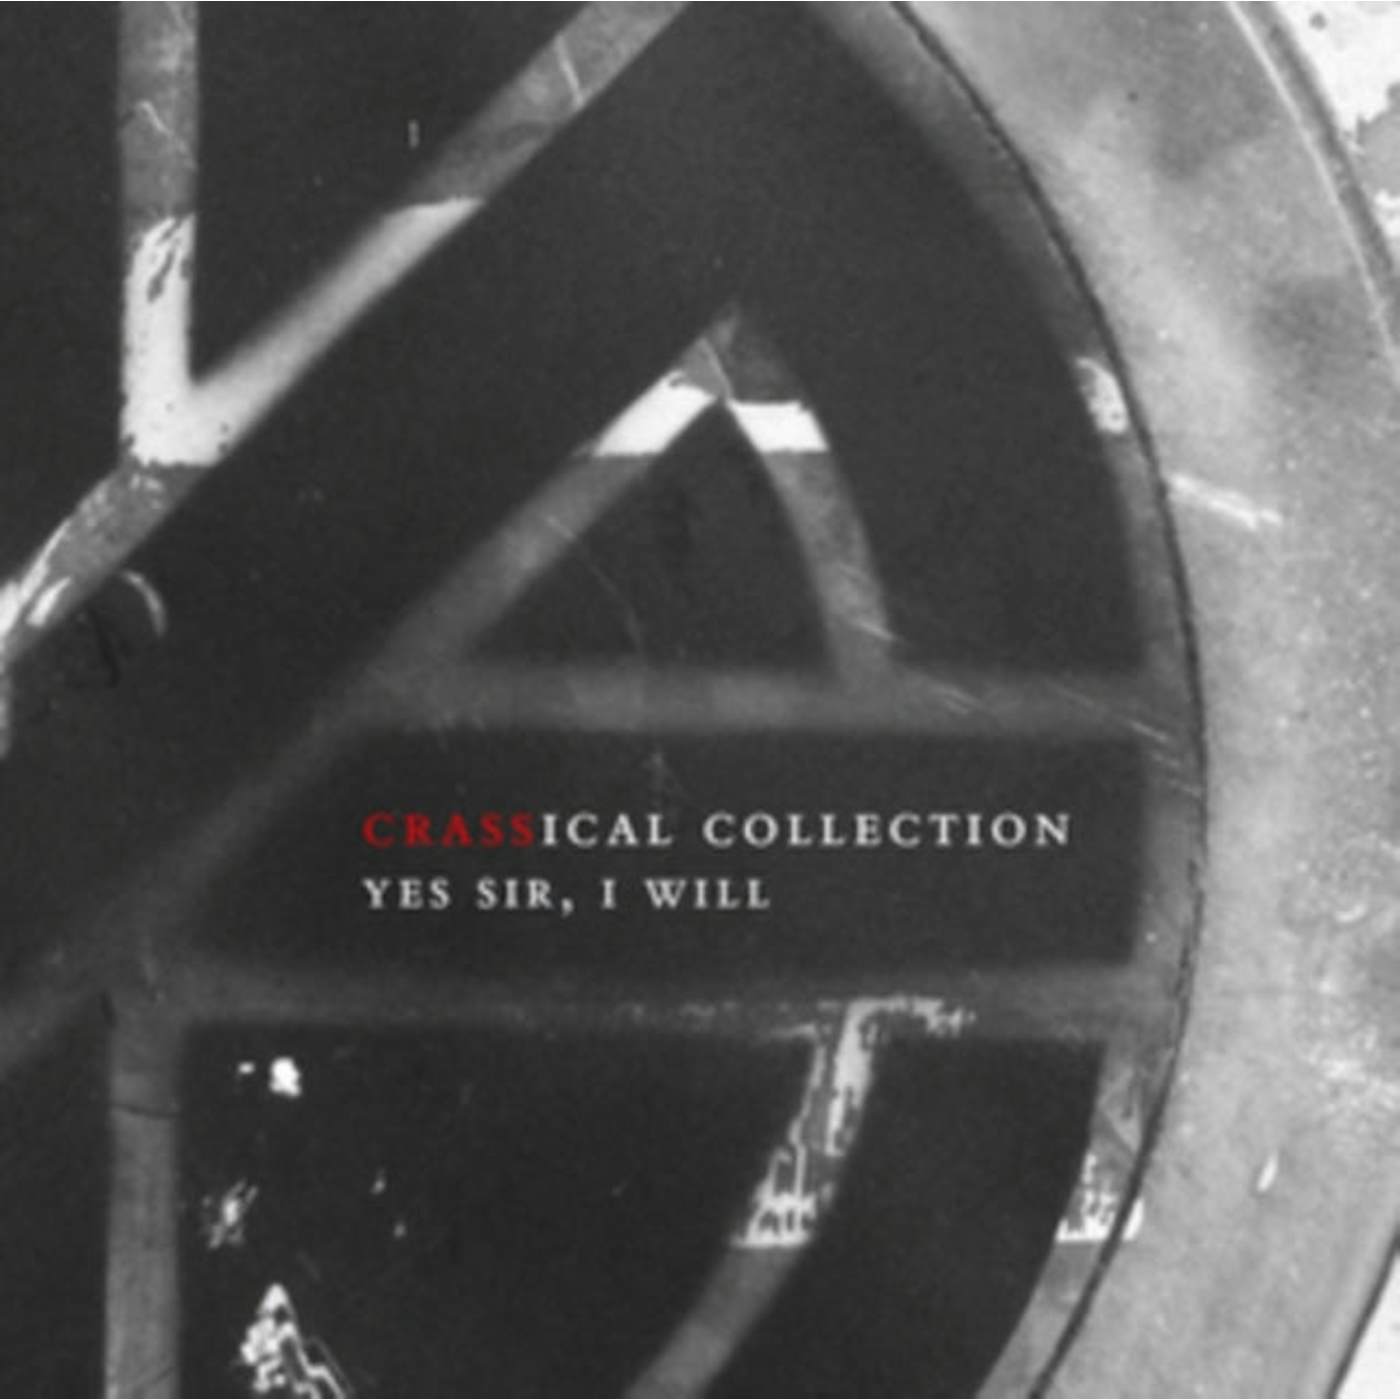 Crass CD - Yes Sir. I Will (Crassical Collection)